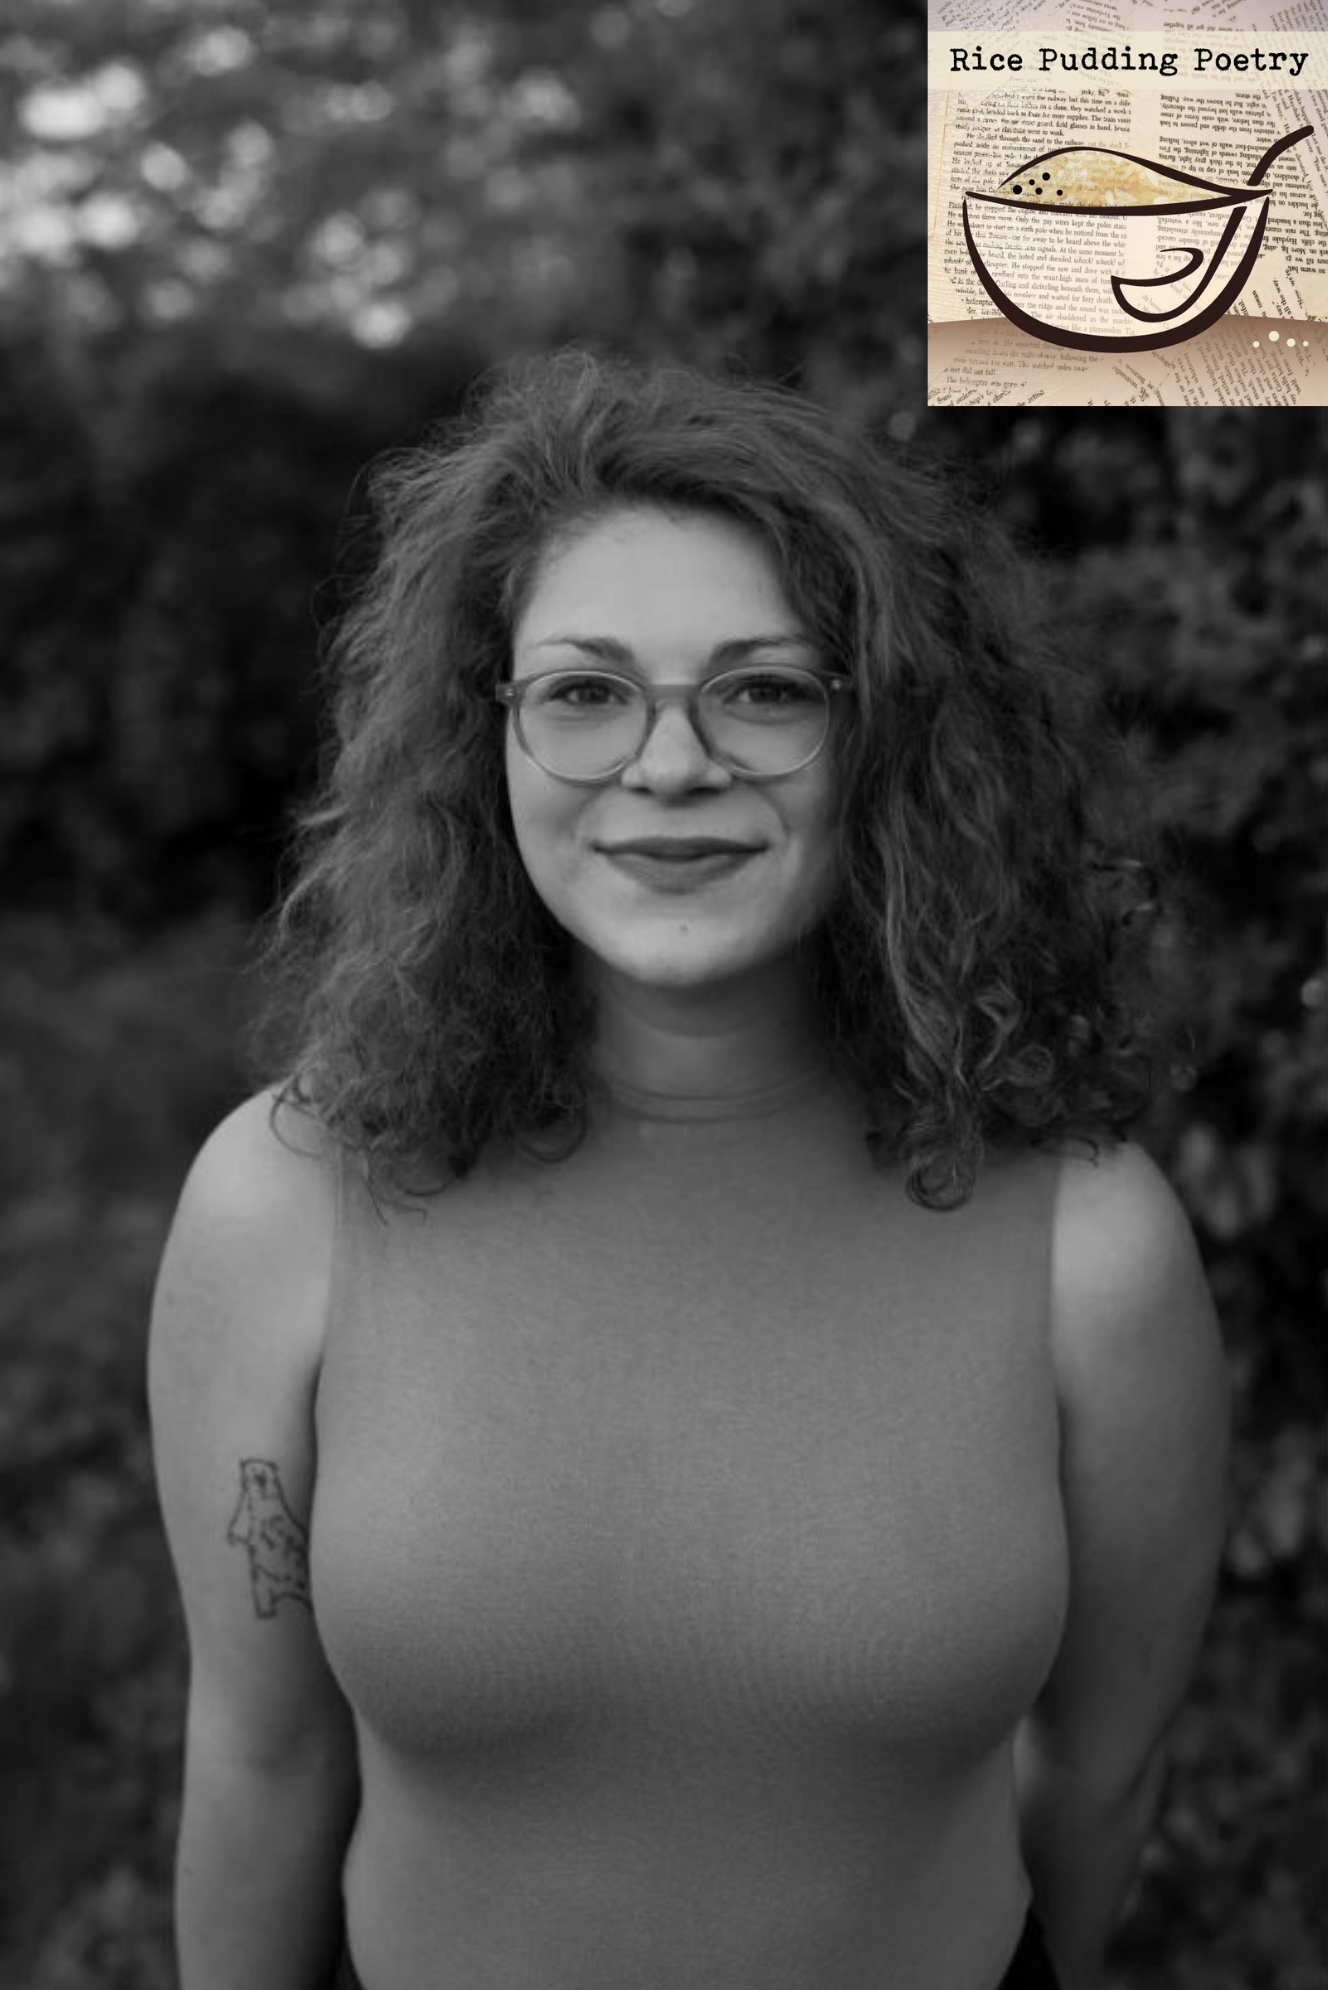 Poet Lily Greenberg faces the camera, wearing glasses and smiling in an outdoor setting with trees behind her; she wears a sleeveless shirt and a tattoo of a bear is visible on one arm; the photo is in black and white. The Rice Pudding Poetry logo is in the upper right corner--a cartoon bowl of rice pudding with a spoon, in front of book pages.